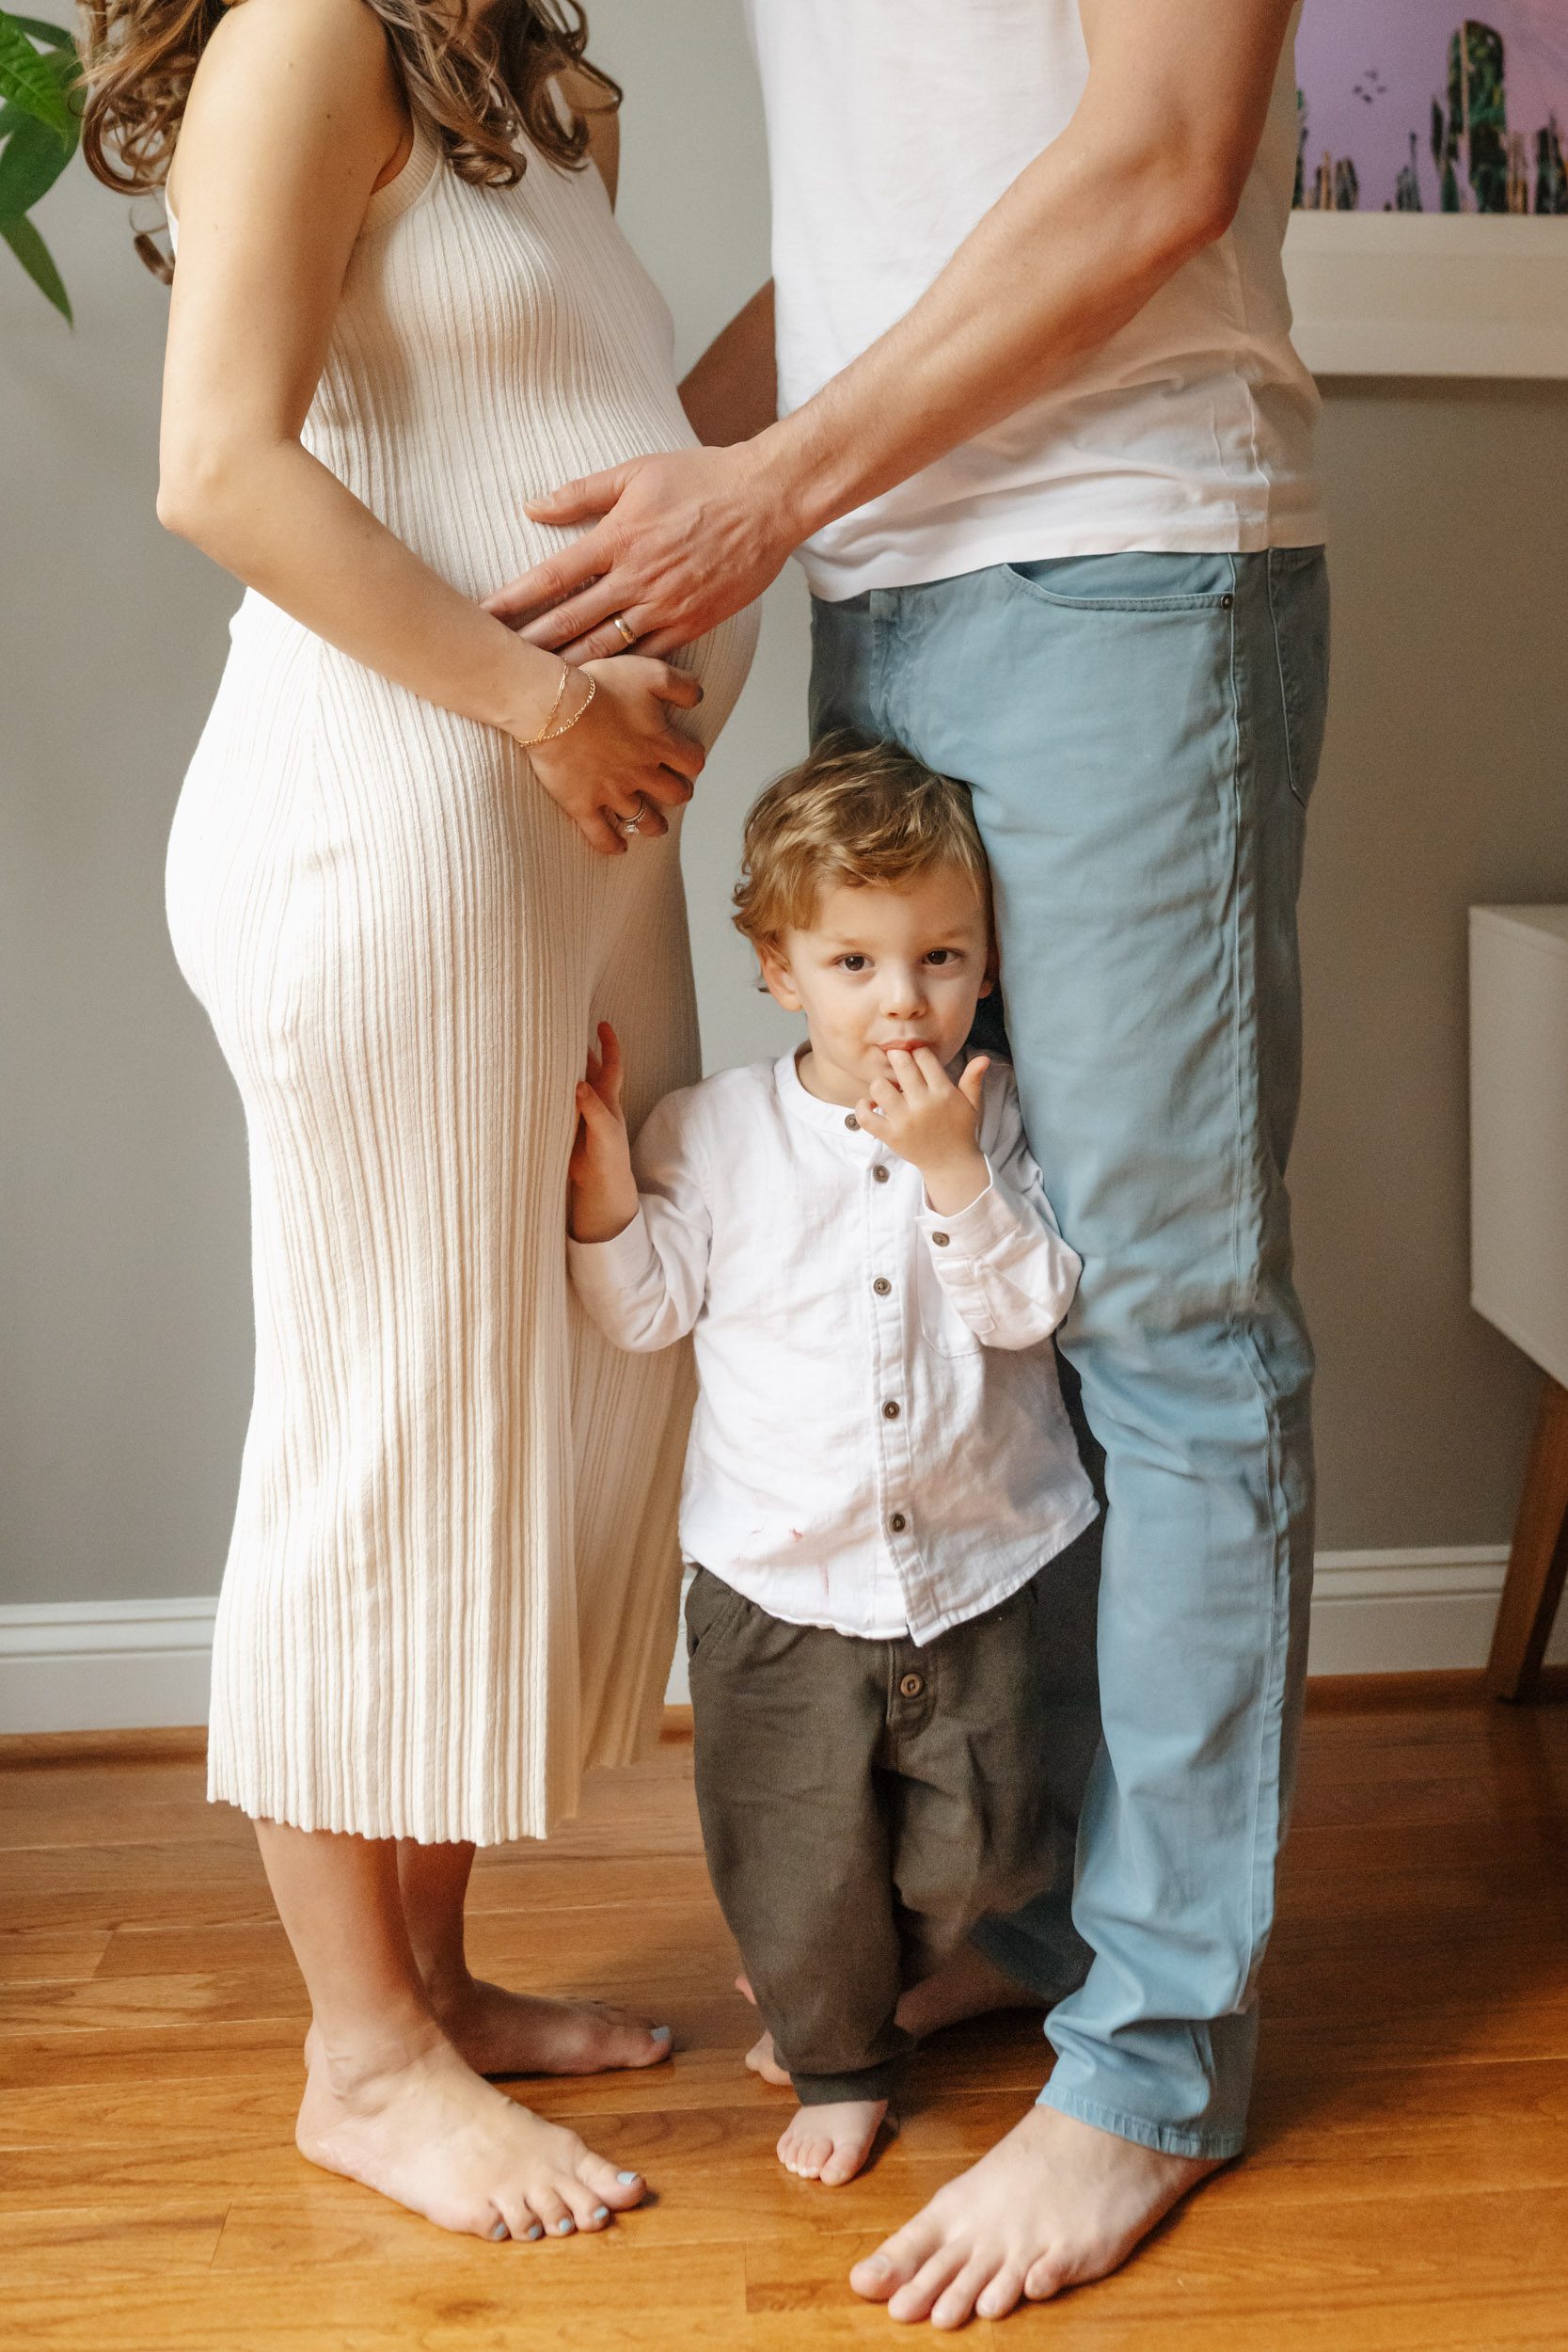 a close up picture of a little boy looking right at the camera and sucking on his fingers while his mom and dad stand next to him and both touch mom's belly during an in home maternity photoshoot